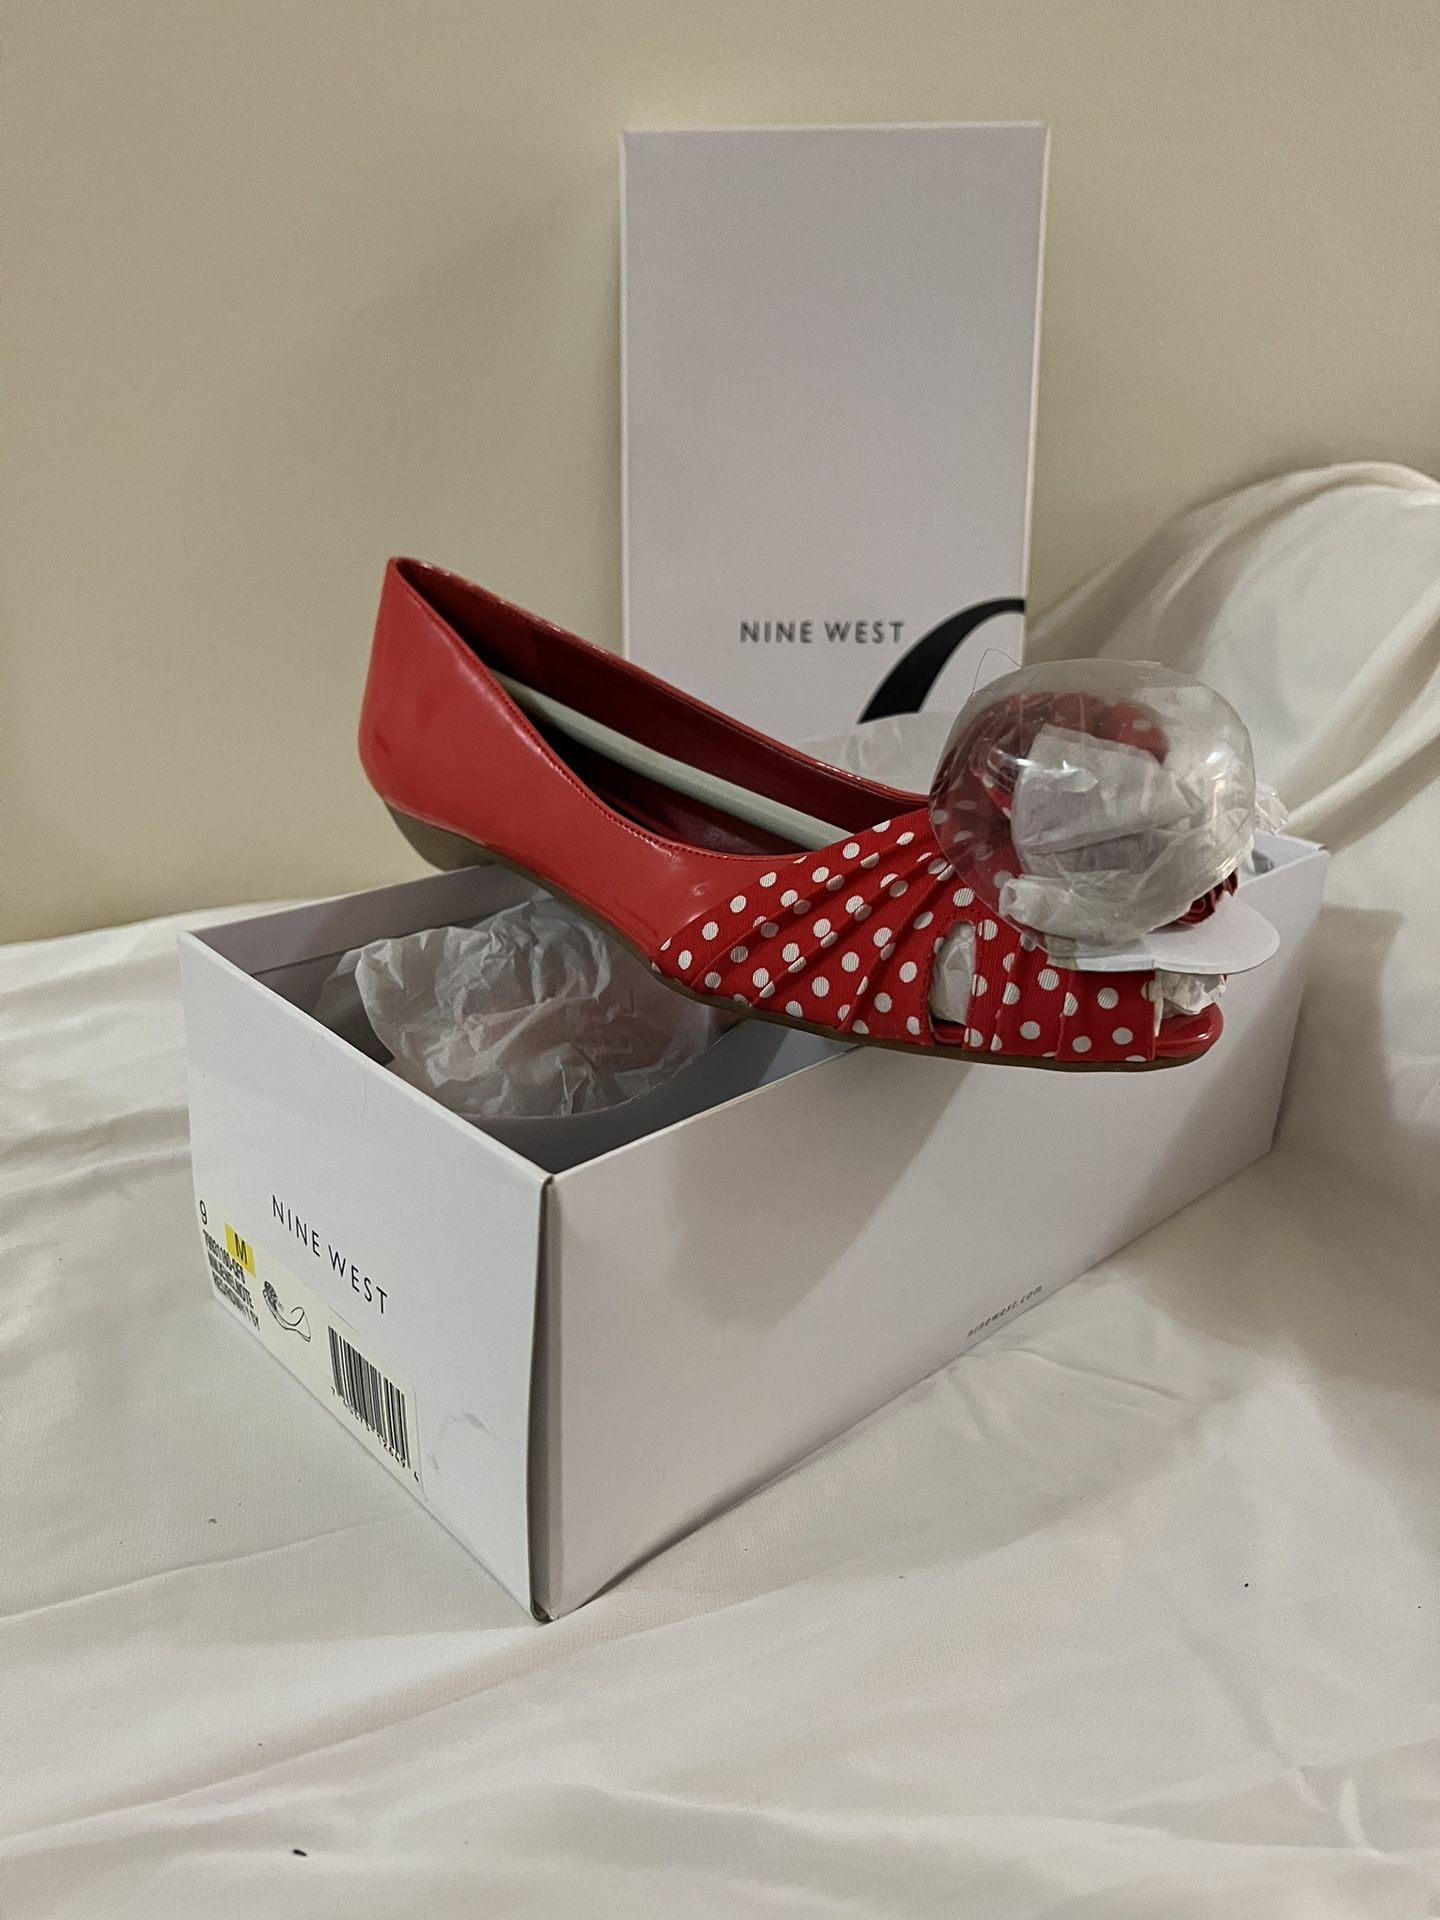 NEW: Red Shoes With a bow